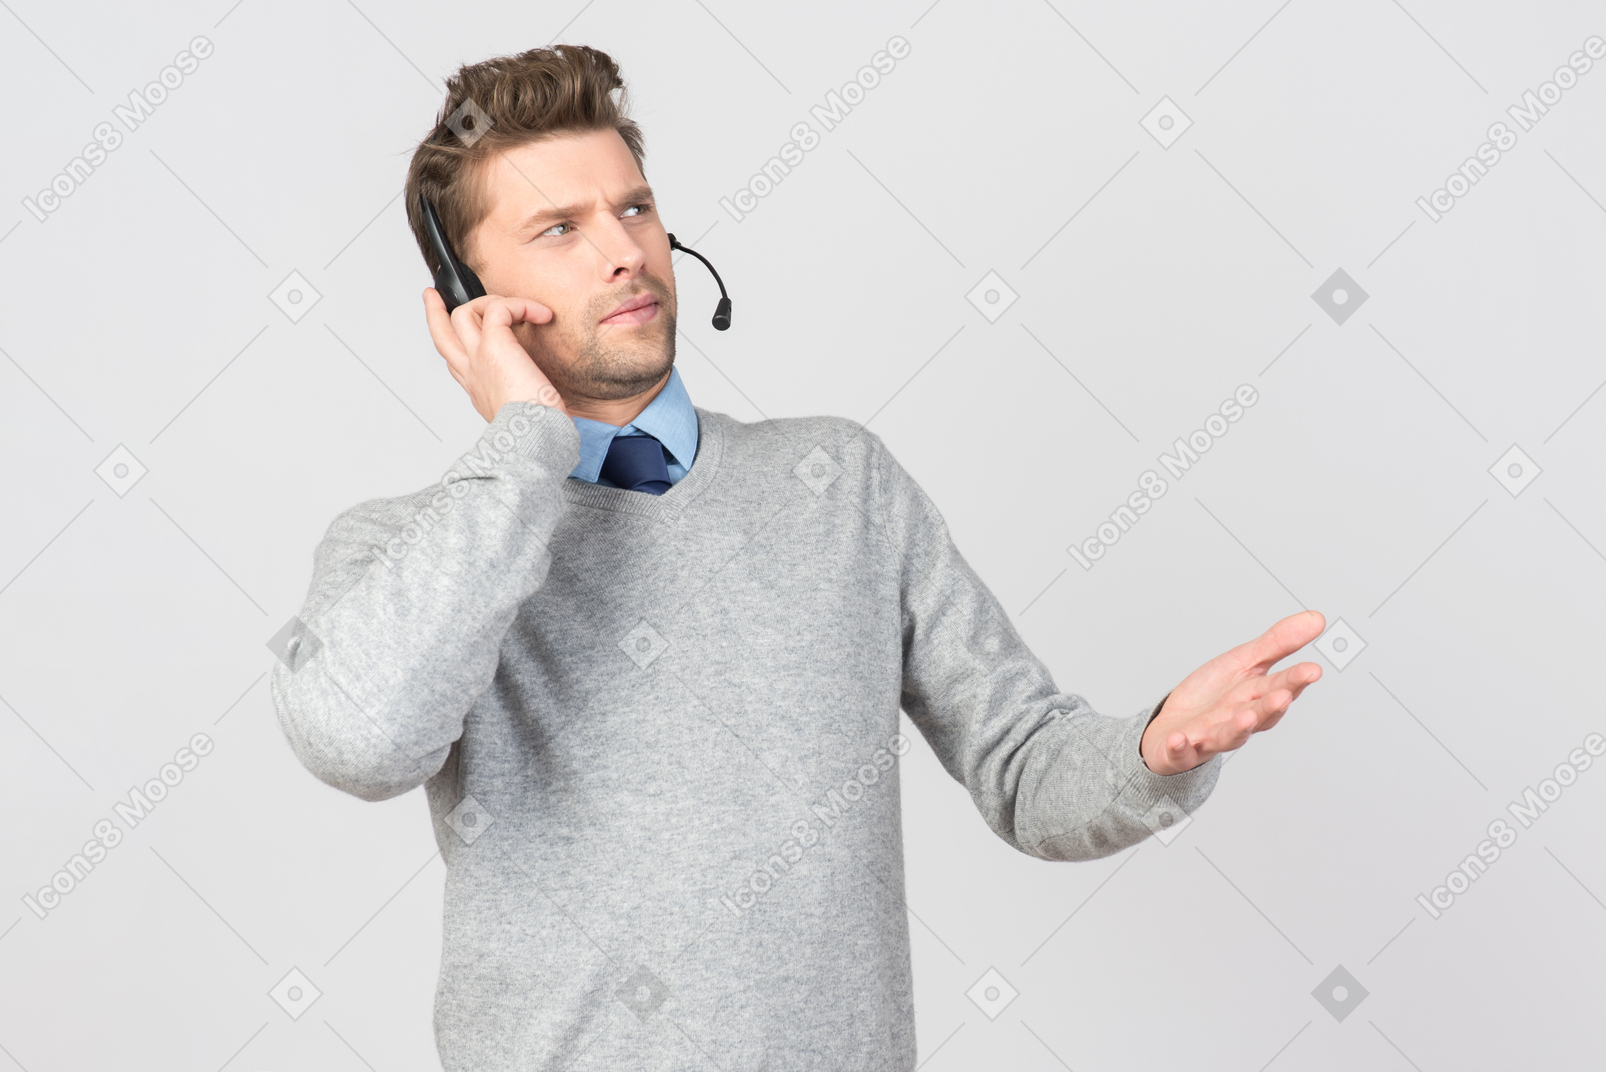 Call center agent seems not understanding something while talking